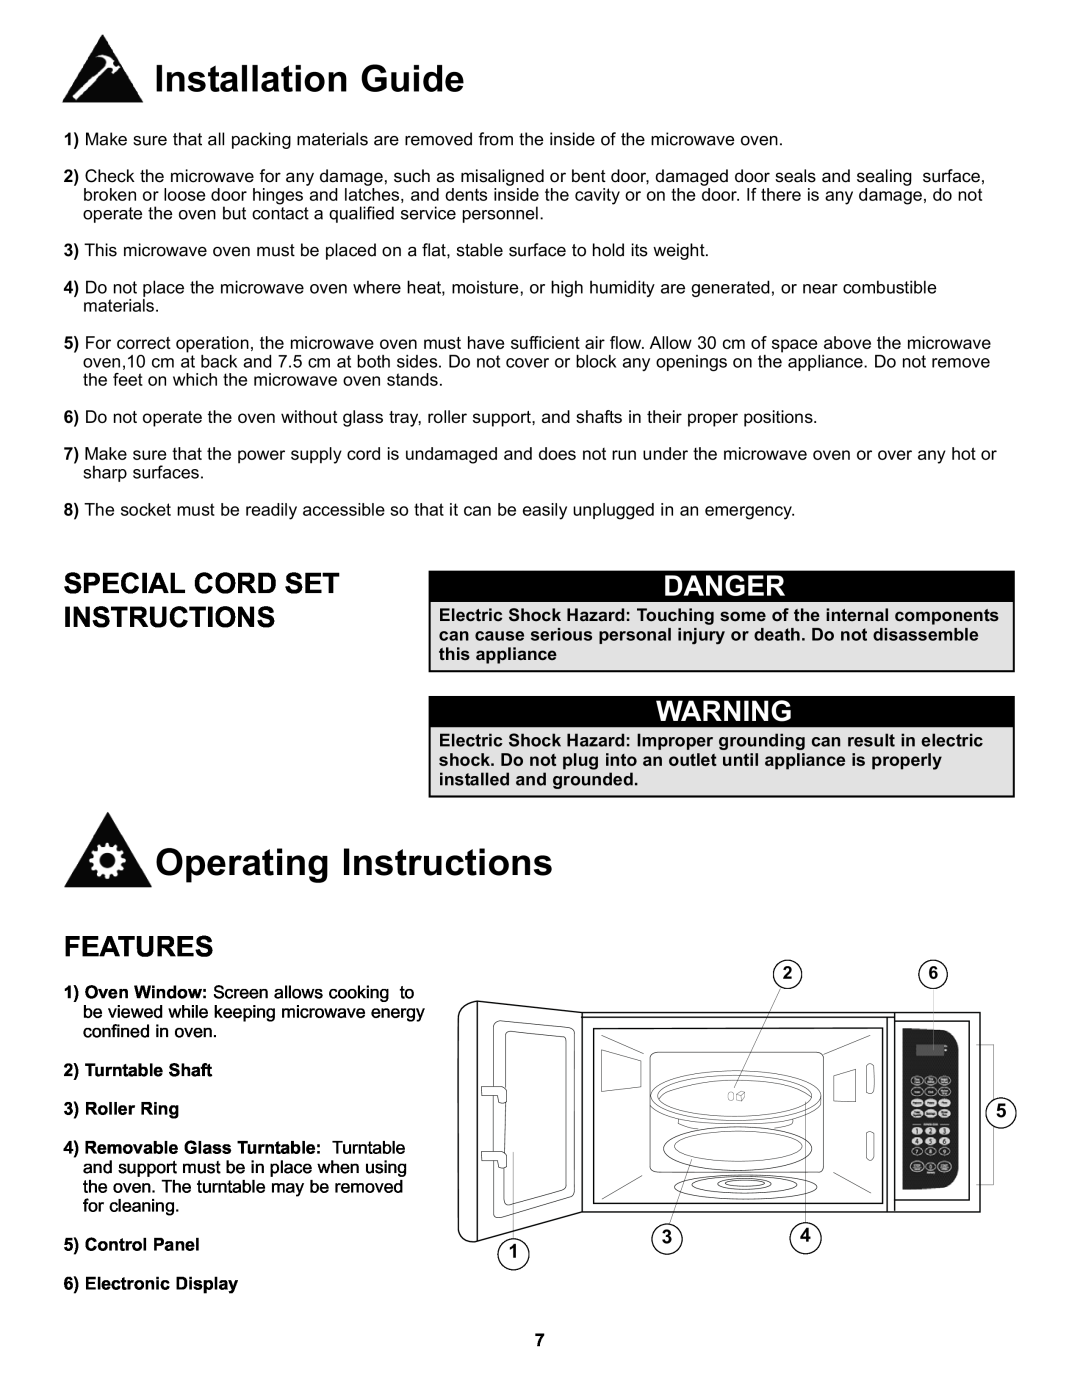 Danby DMW7700WDB manual Installation Guide, Operating Instructions, Special Cord Set Instructions, Danger, Features 